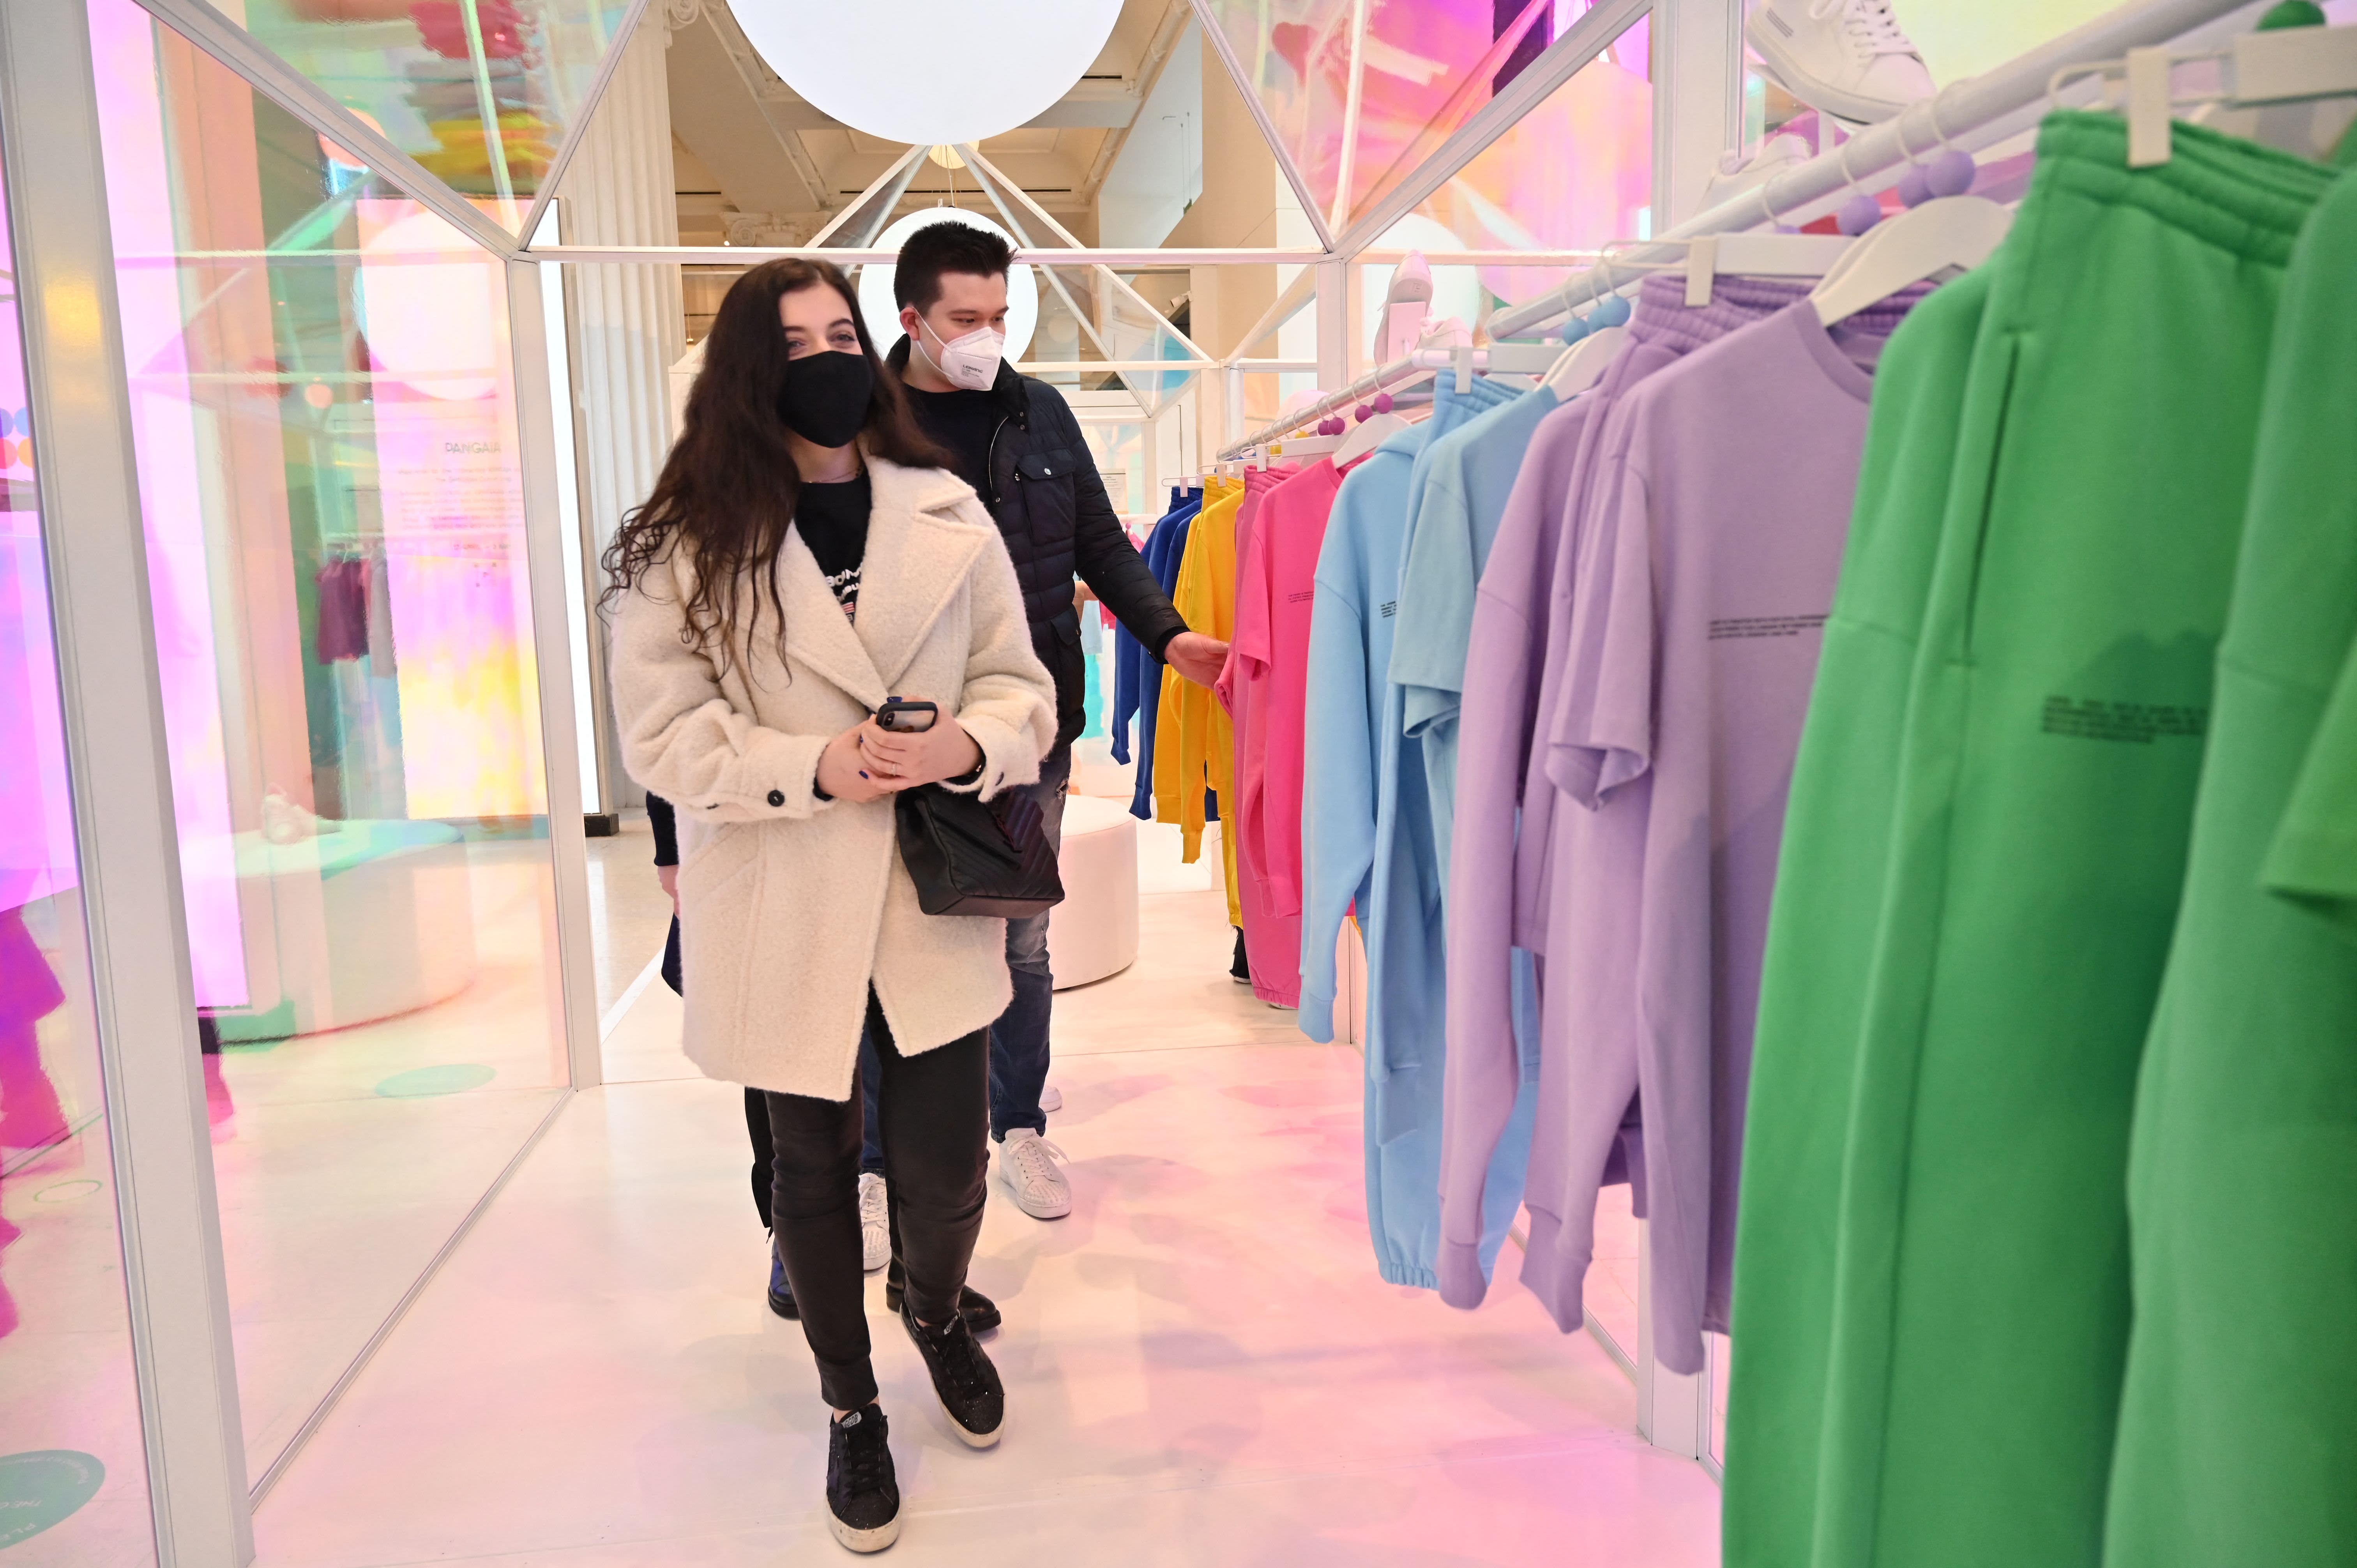 Experts see innovation and pop-up stores